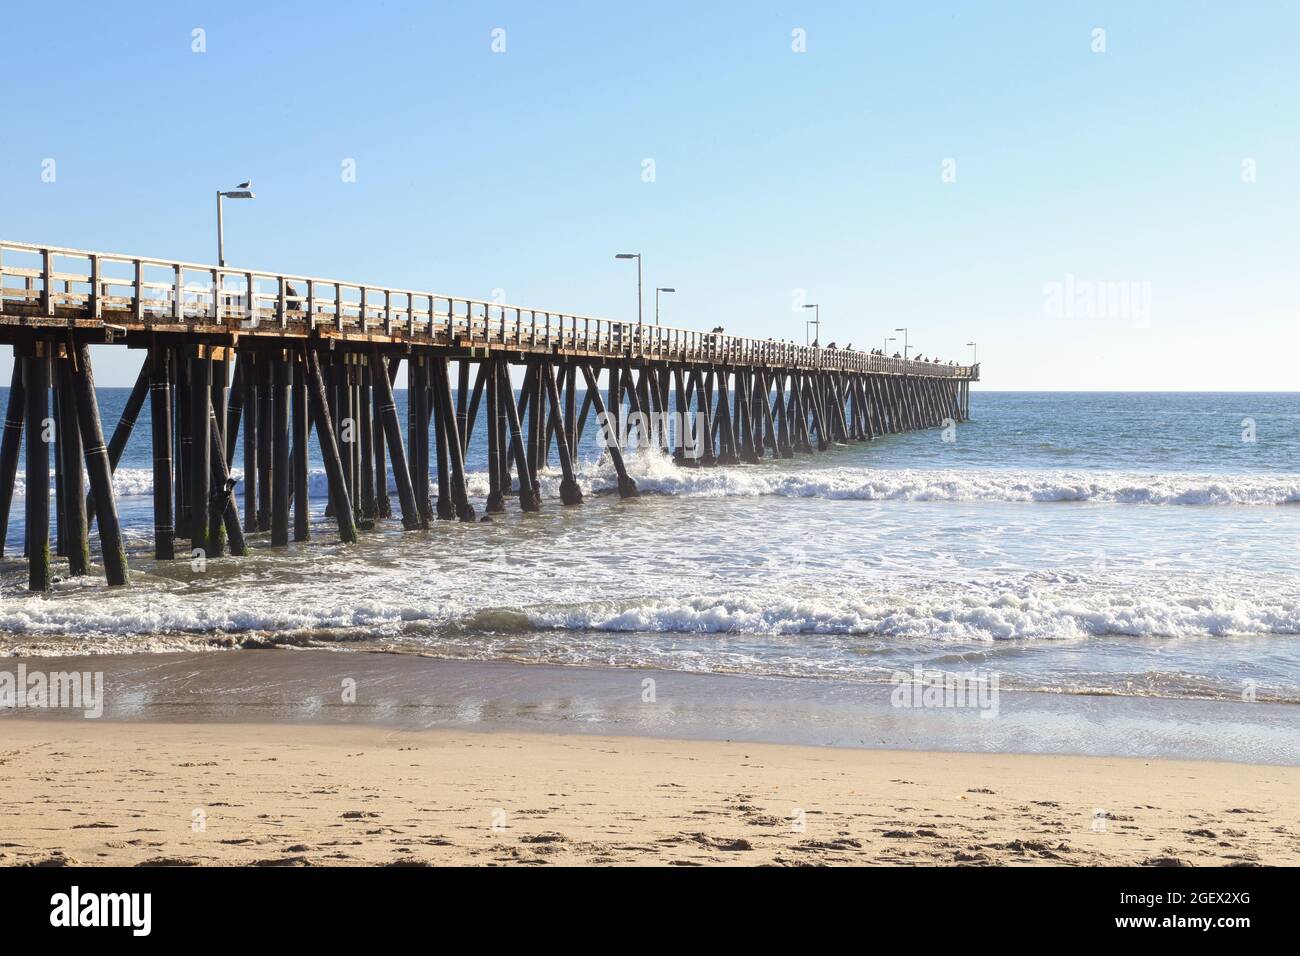 The Port Hueneme Fishing Pier, which is located along the California coast, north of Los Angeles, is shown during the day. Stock Photo